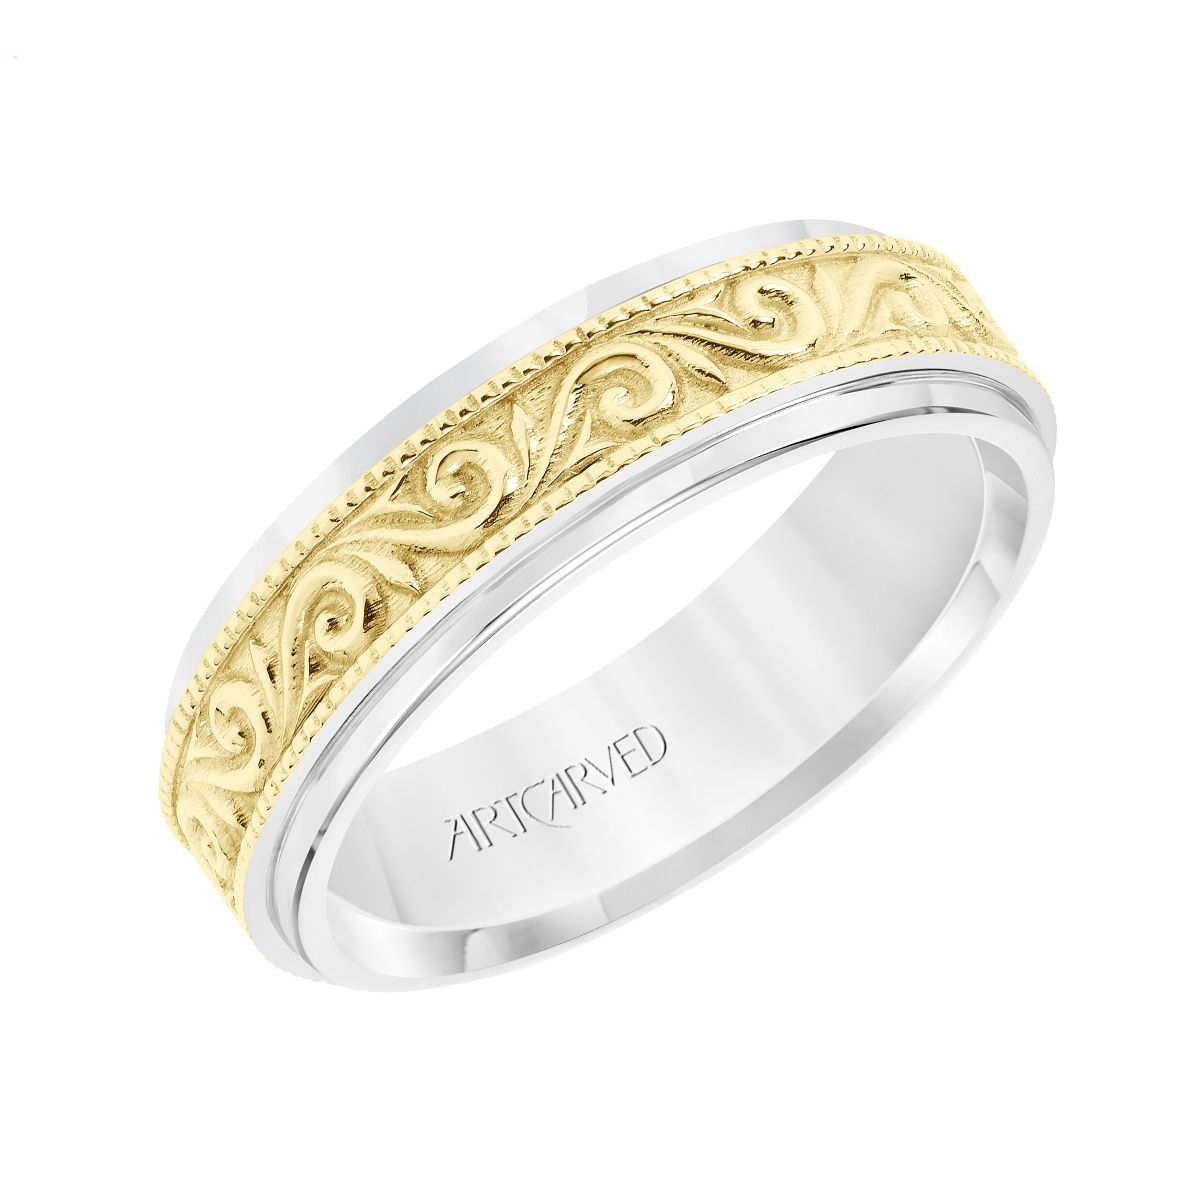 ArtCarved 14K White and Yellow Gold 6.5mm Comfort Fit